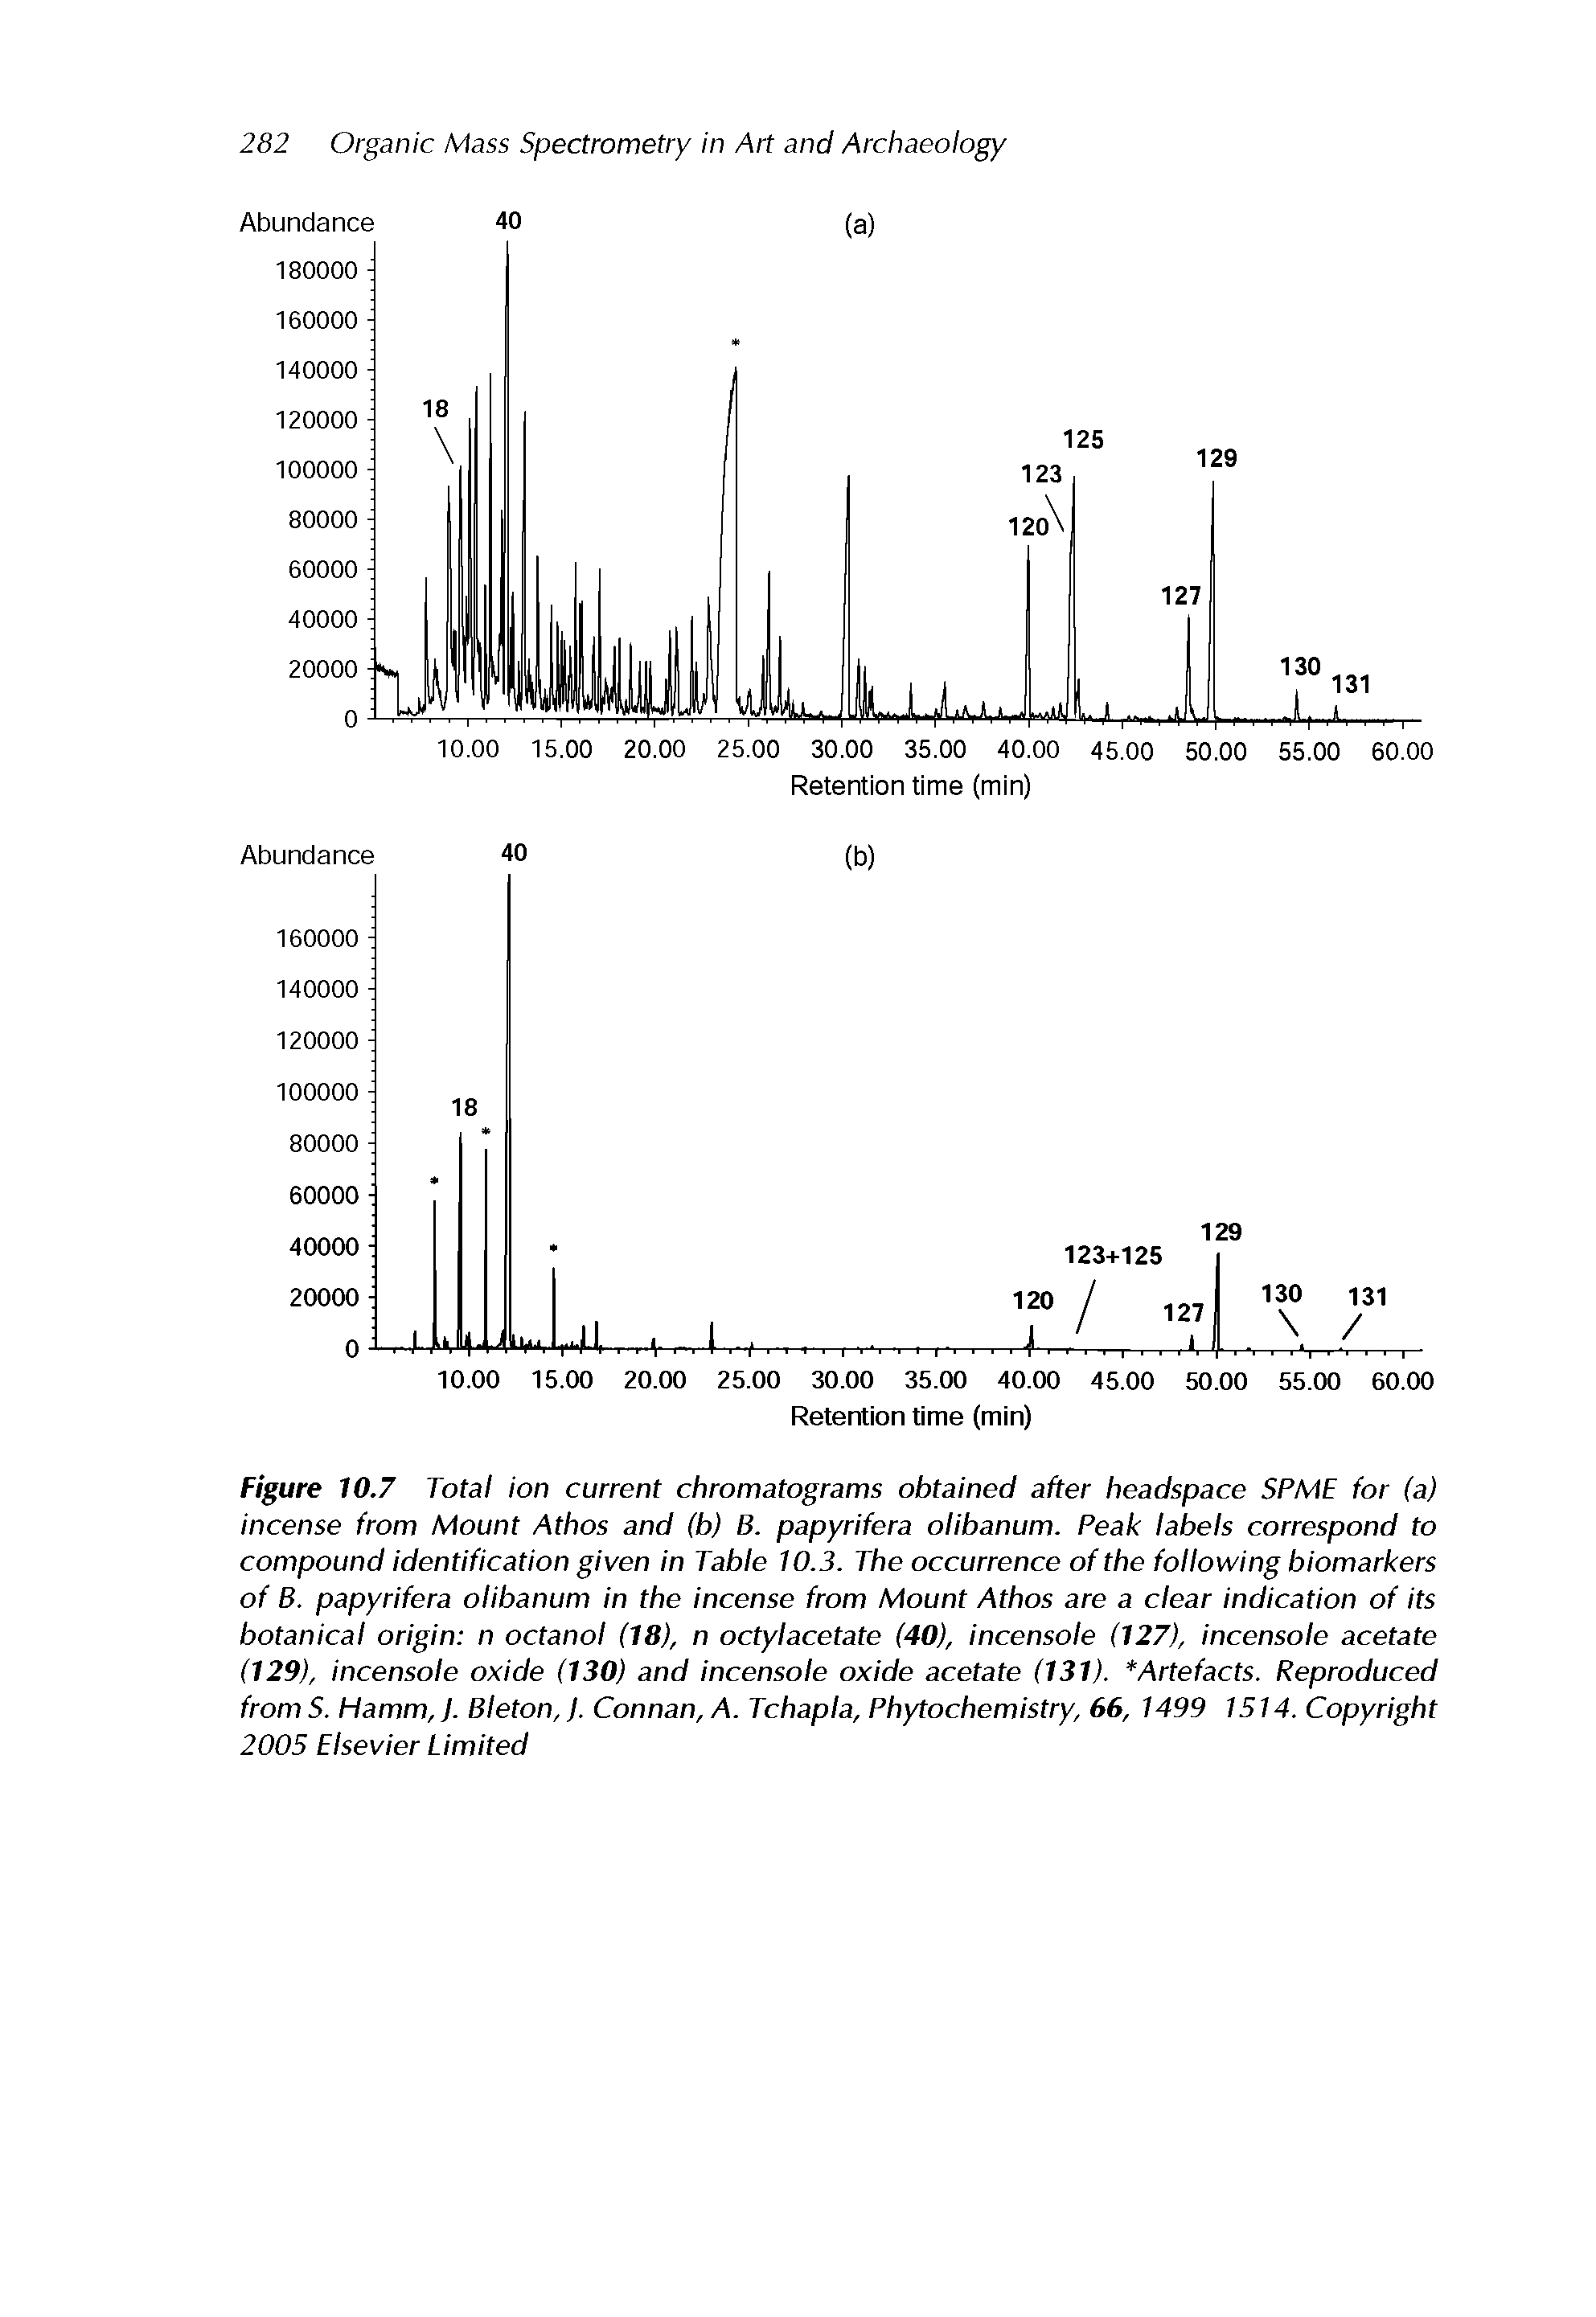 Figure 10.7 Total ion current chromatograms obtained after headspace SPME for (a) incense from Mount Athos and (b) B. papyrifera olibanum. Peak labels correspond to compound identification given in Table 10.3. The occurrence of the following biomarkers of B. papyrifera olibanum in the incense from Mount Athos are a clear indication of its botanical origin n octanol (18), n octylacetate (40), incensole (127), incensole acetate (129), incensole oxide (130) and incensole oxide acetate (131). Artefacts. Reproduced from S. Hamm, J. Bleton,). Connan, A. Tchapla, Phytochemistry, 66, 1499 1514. Copyright 2005 Elsevier Limited...